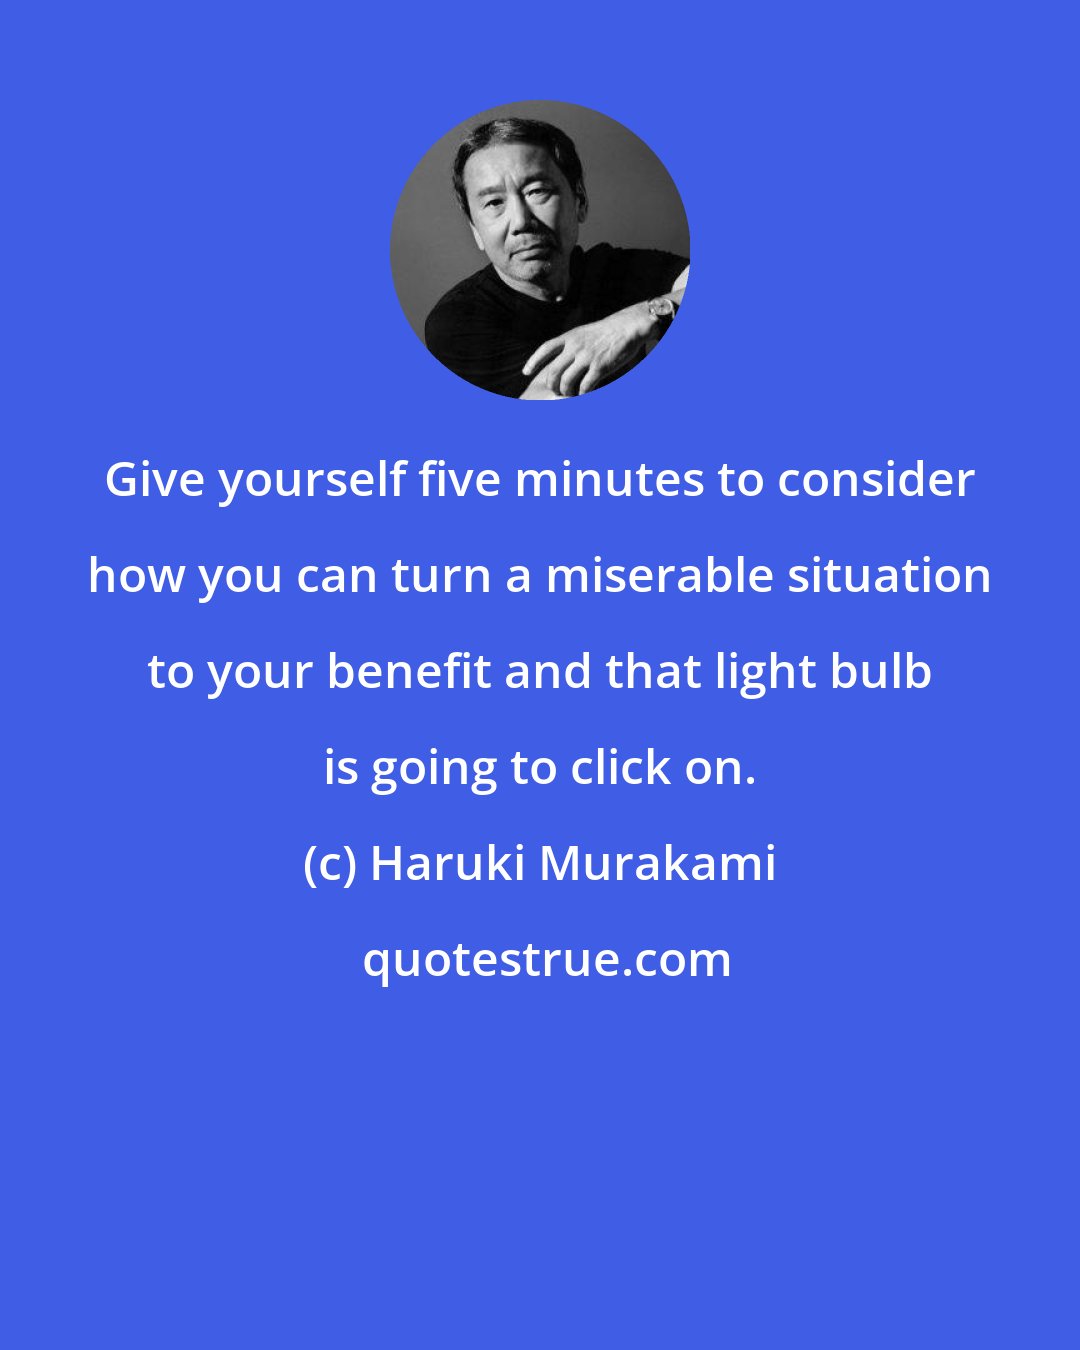 Haruki Murakami: Give yourself five minutes to consider how you can turn a miserable situation to your benefit and that light bulb is going to click on.